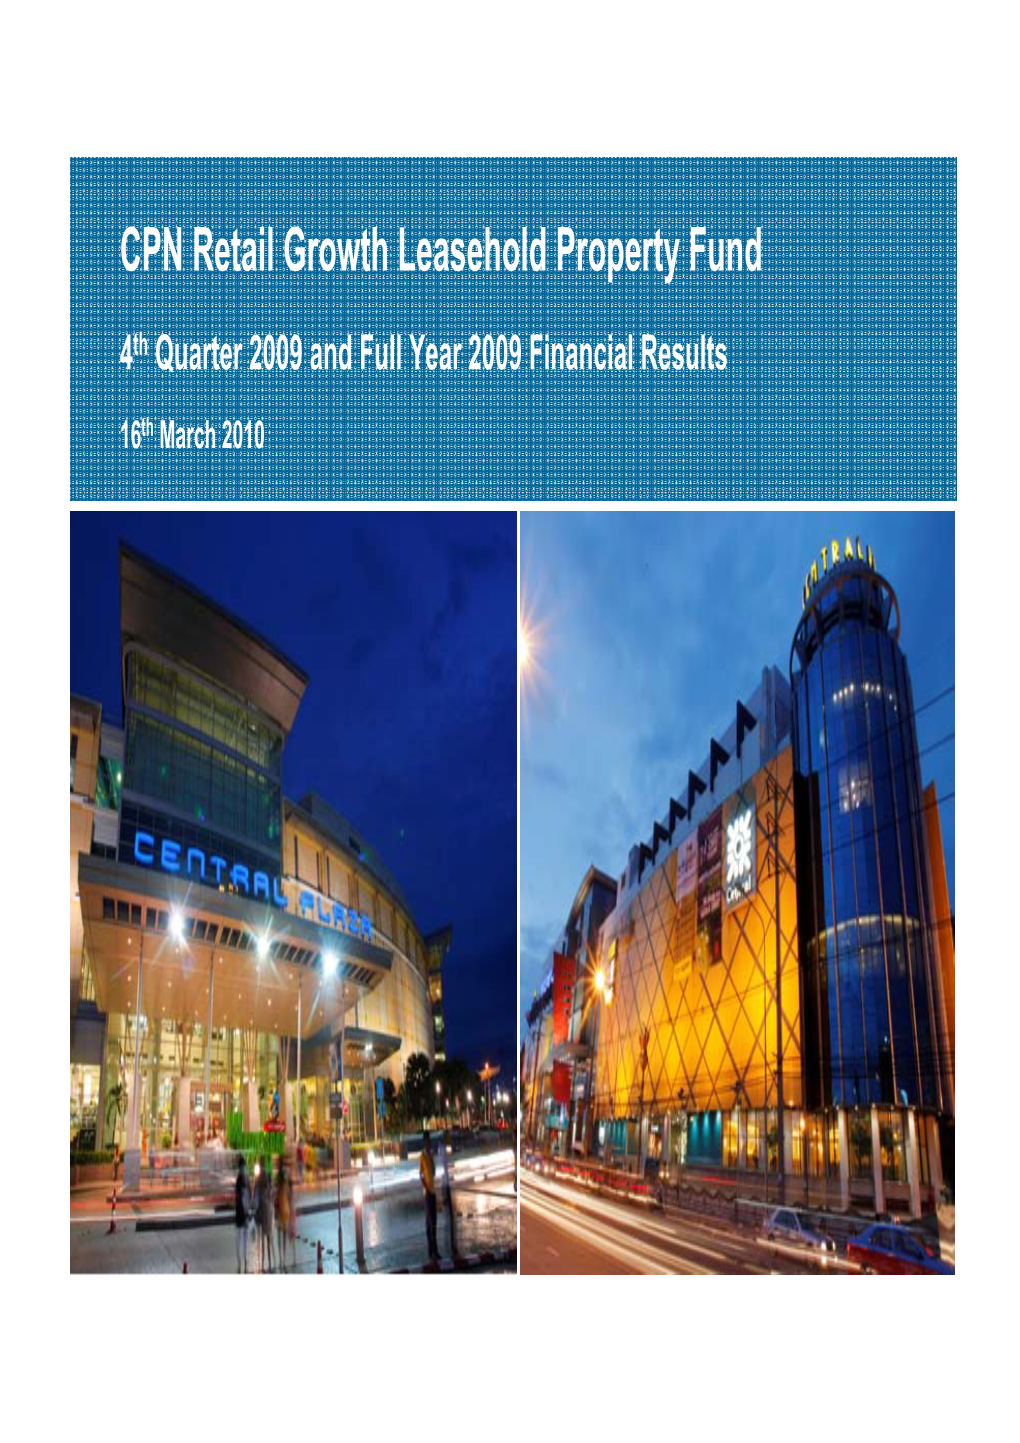 CPN Retail Growth Leasehold Property Fund (CPNRF)